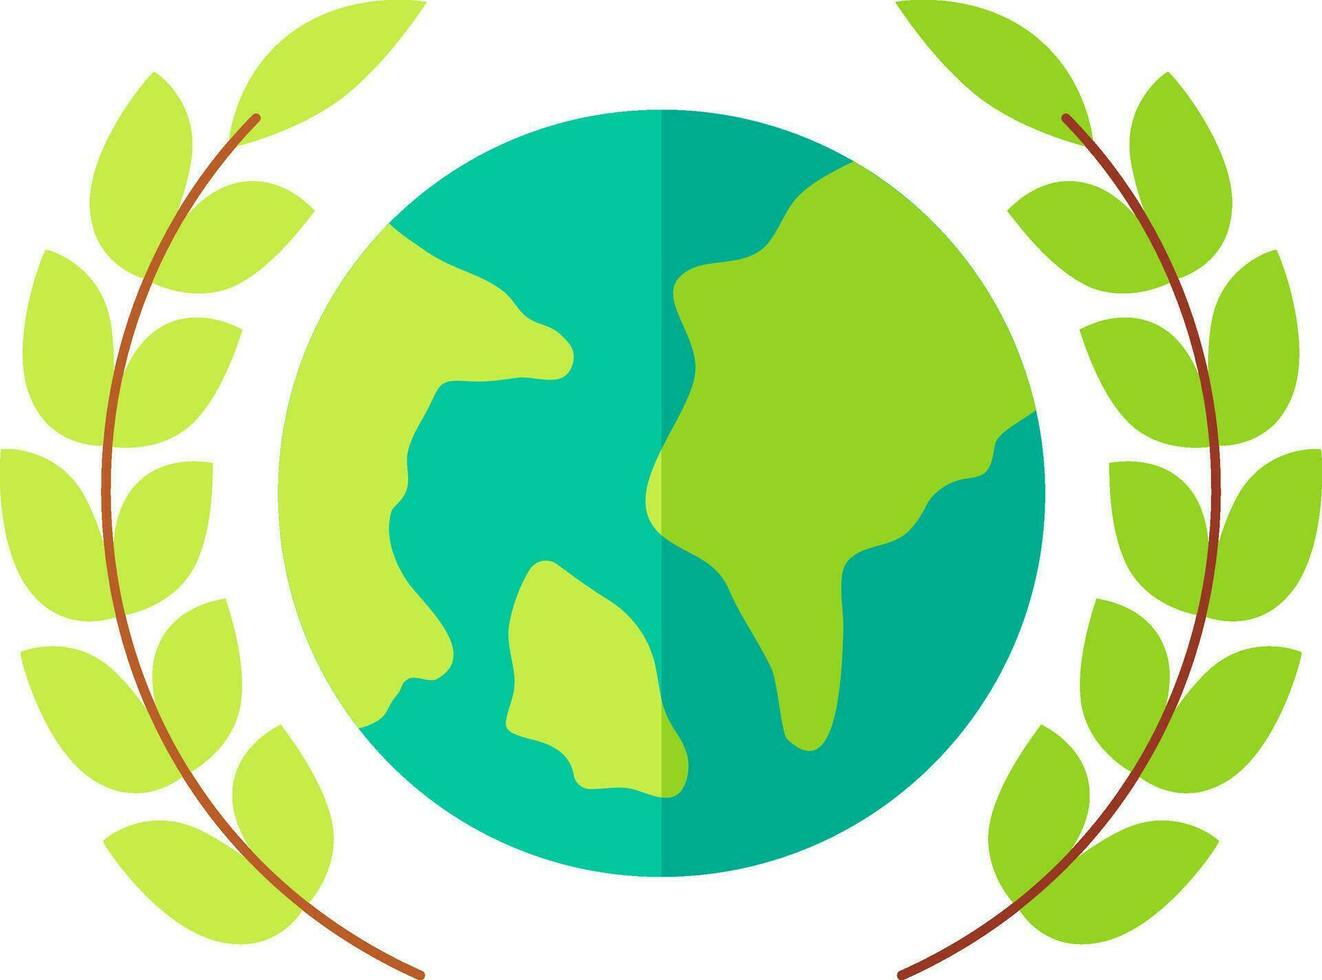 Laurel wreath with earth globe icon in green color. vector